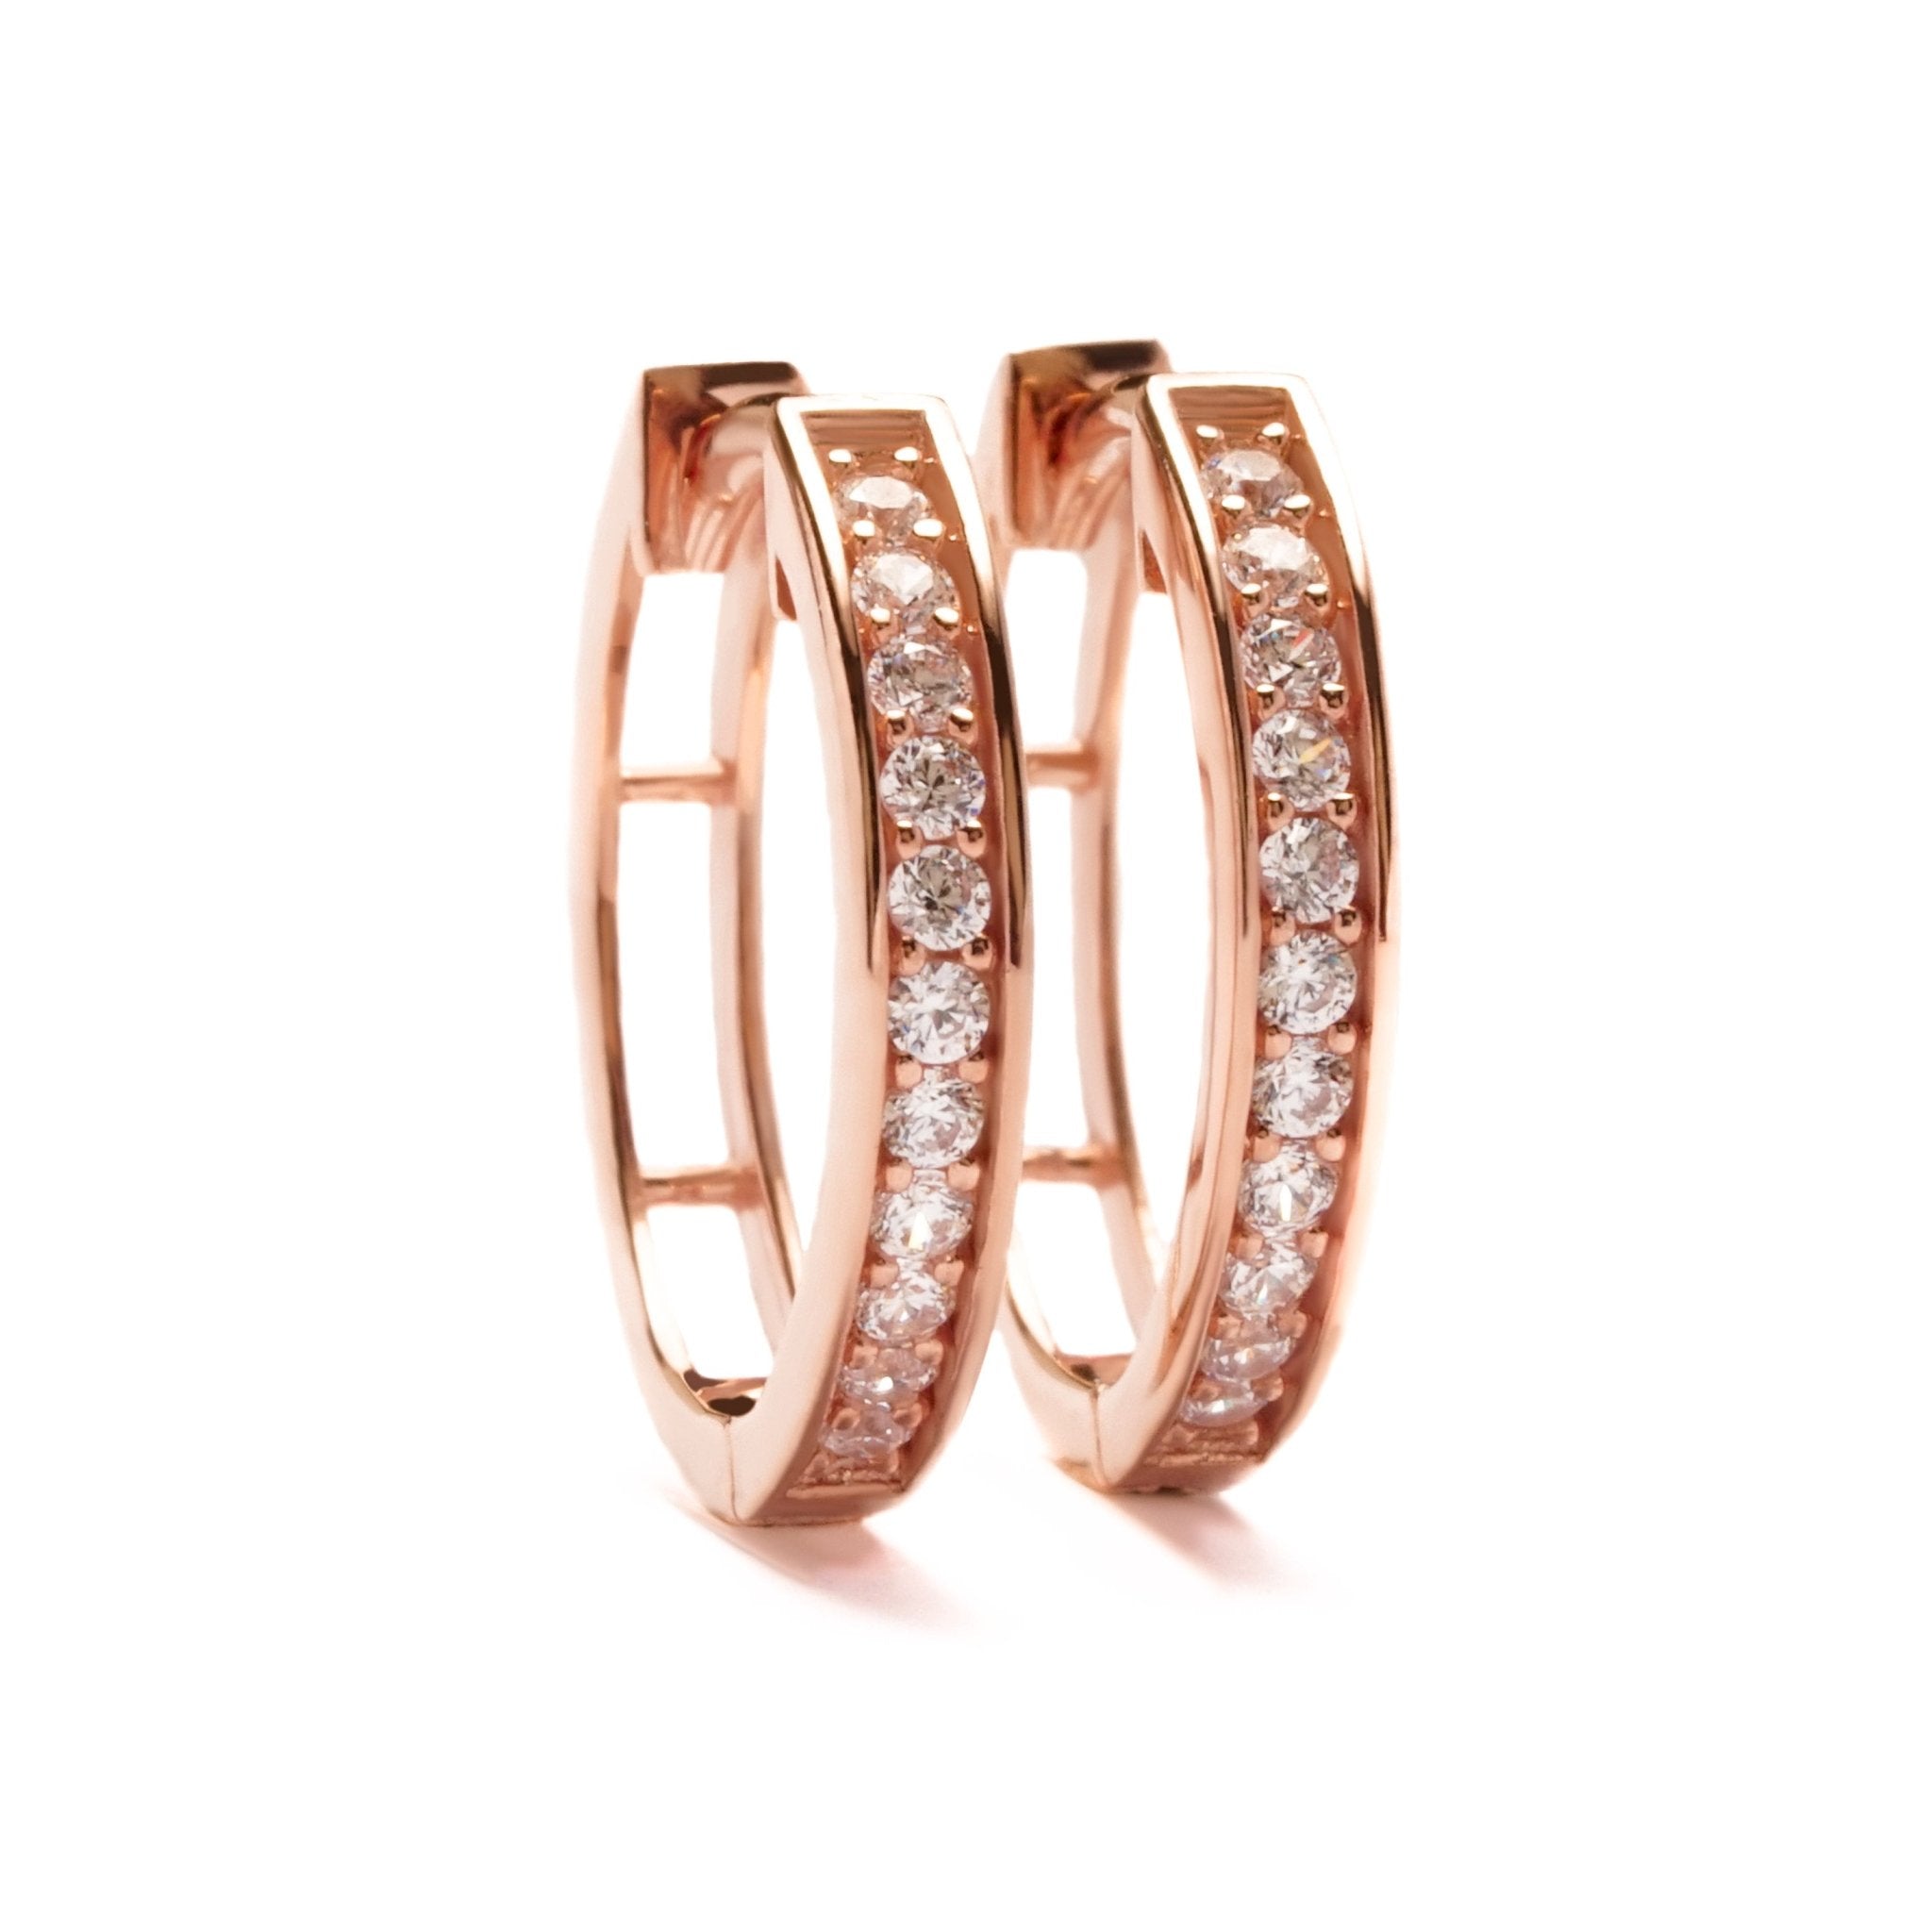 Ella Gold Hoops Earring - Modest Collection - Juene Jewelry